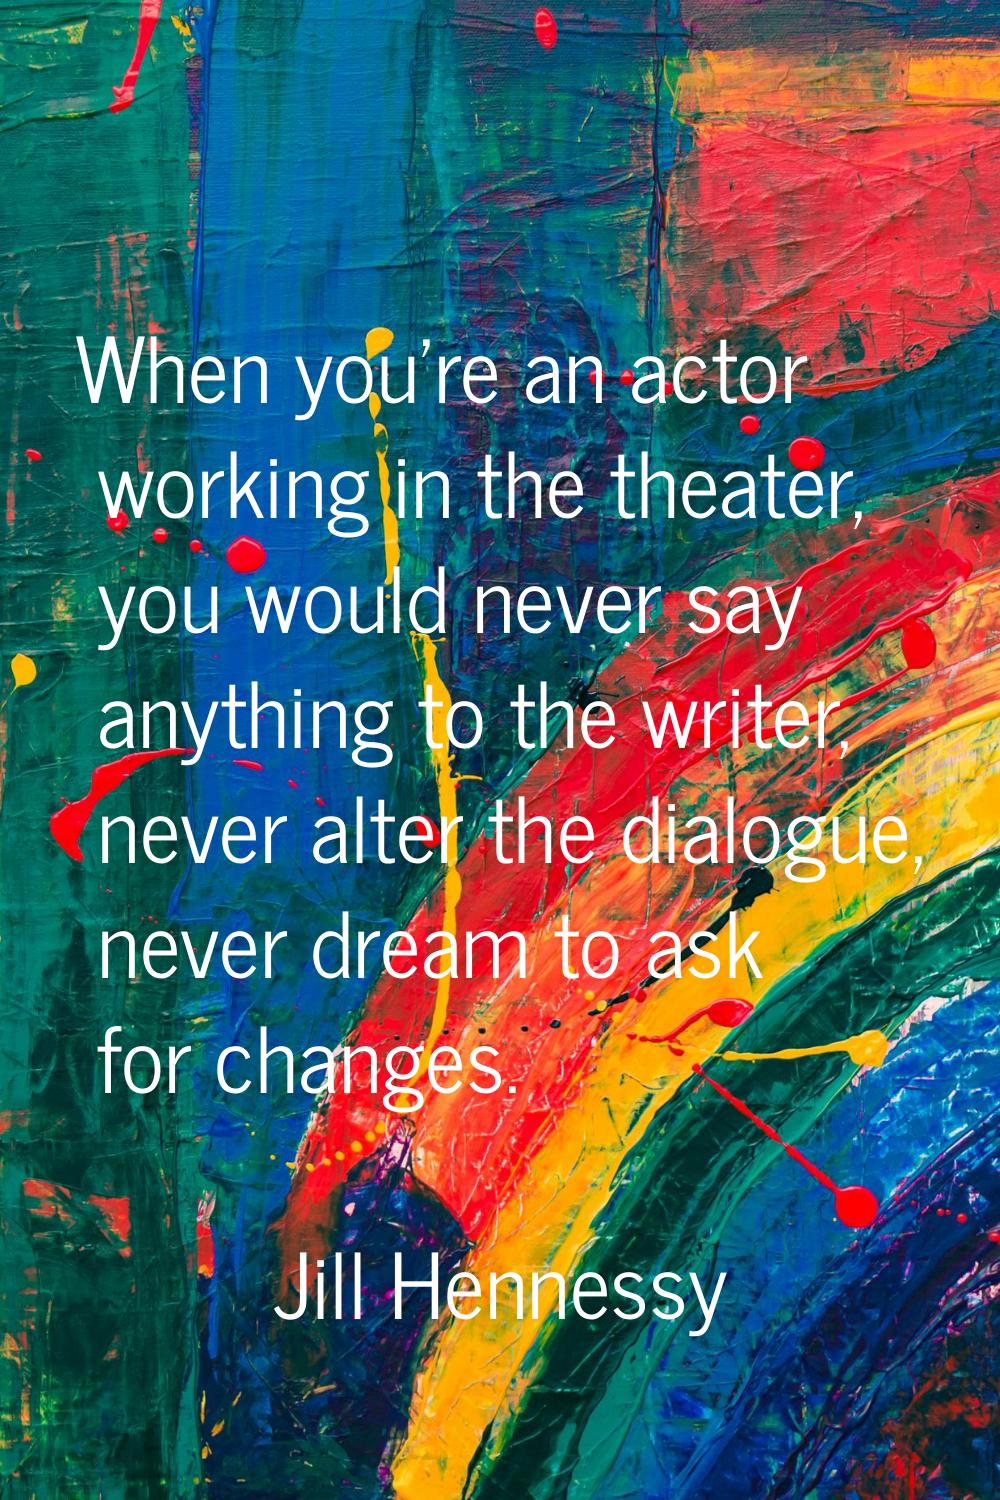 When you're an actor working in the theater, you would never say anything to the writer, never alte